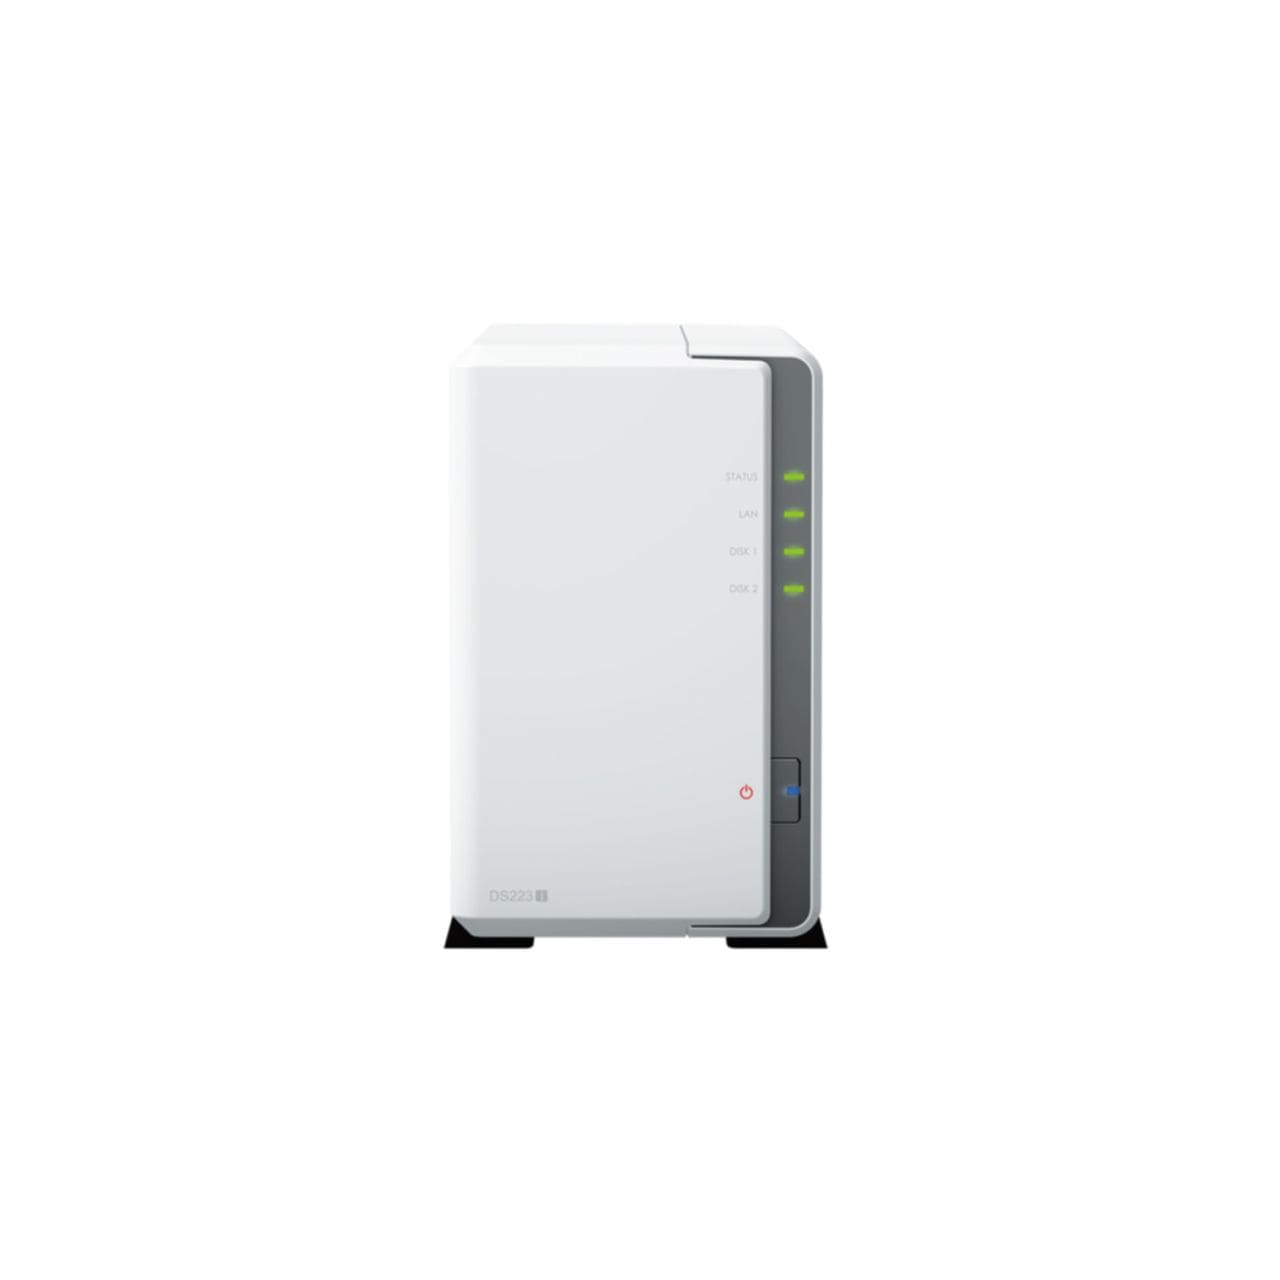 Synology DS223j 2-Bay NAS with 1GB RAM and 8TB (2 x 4TB) of